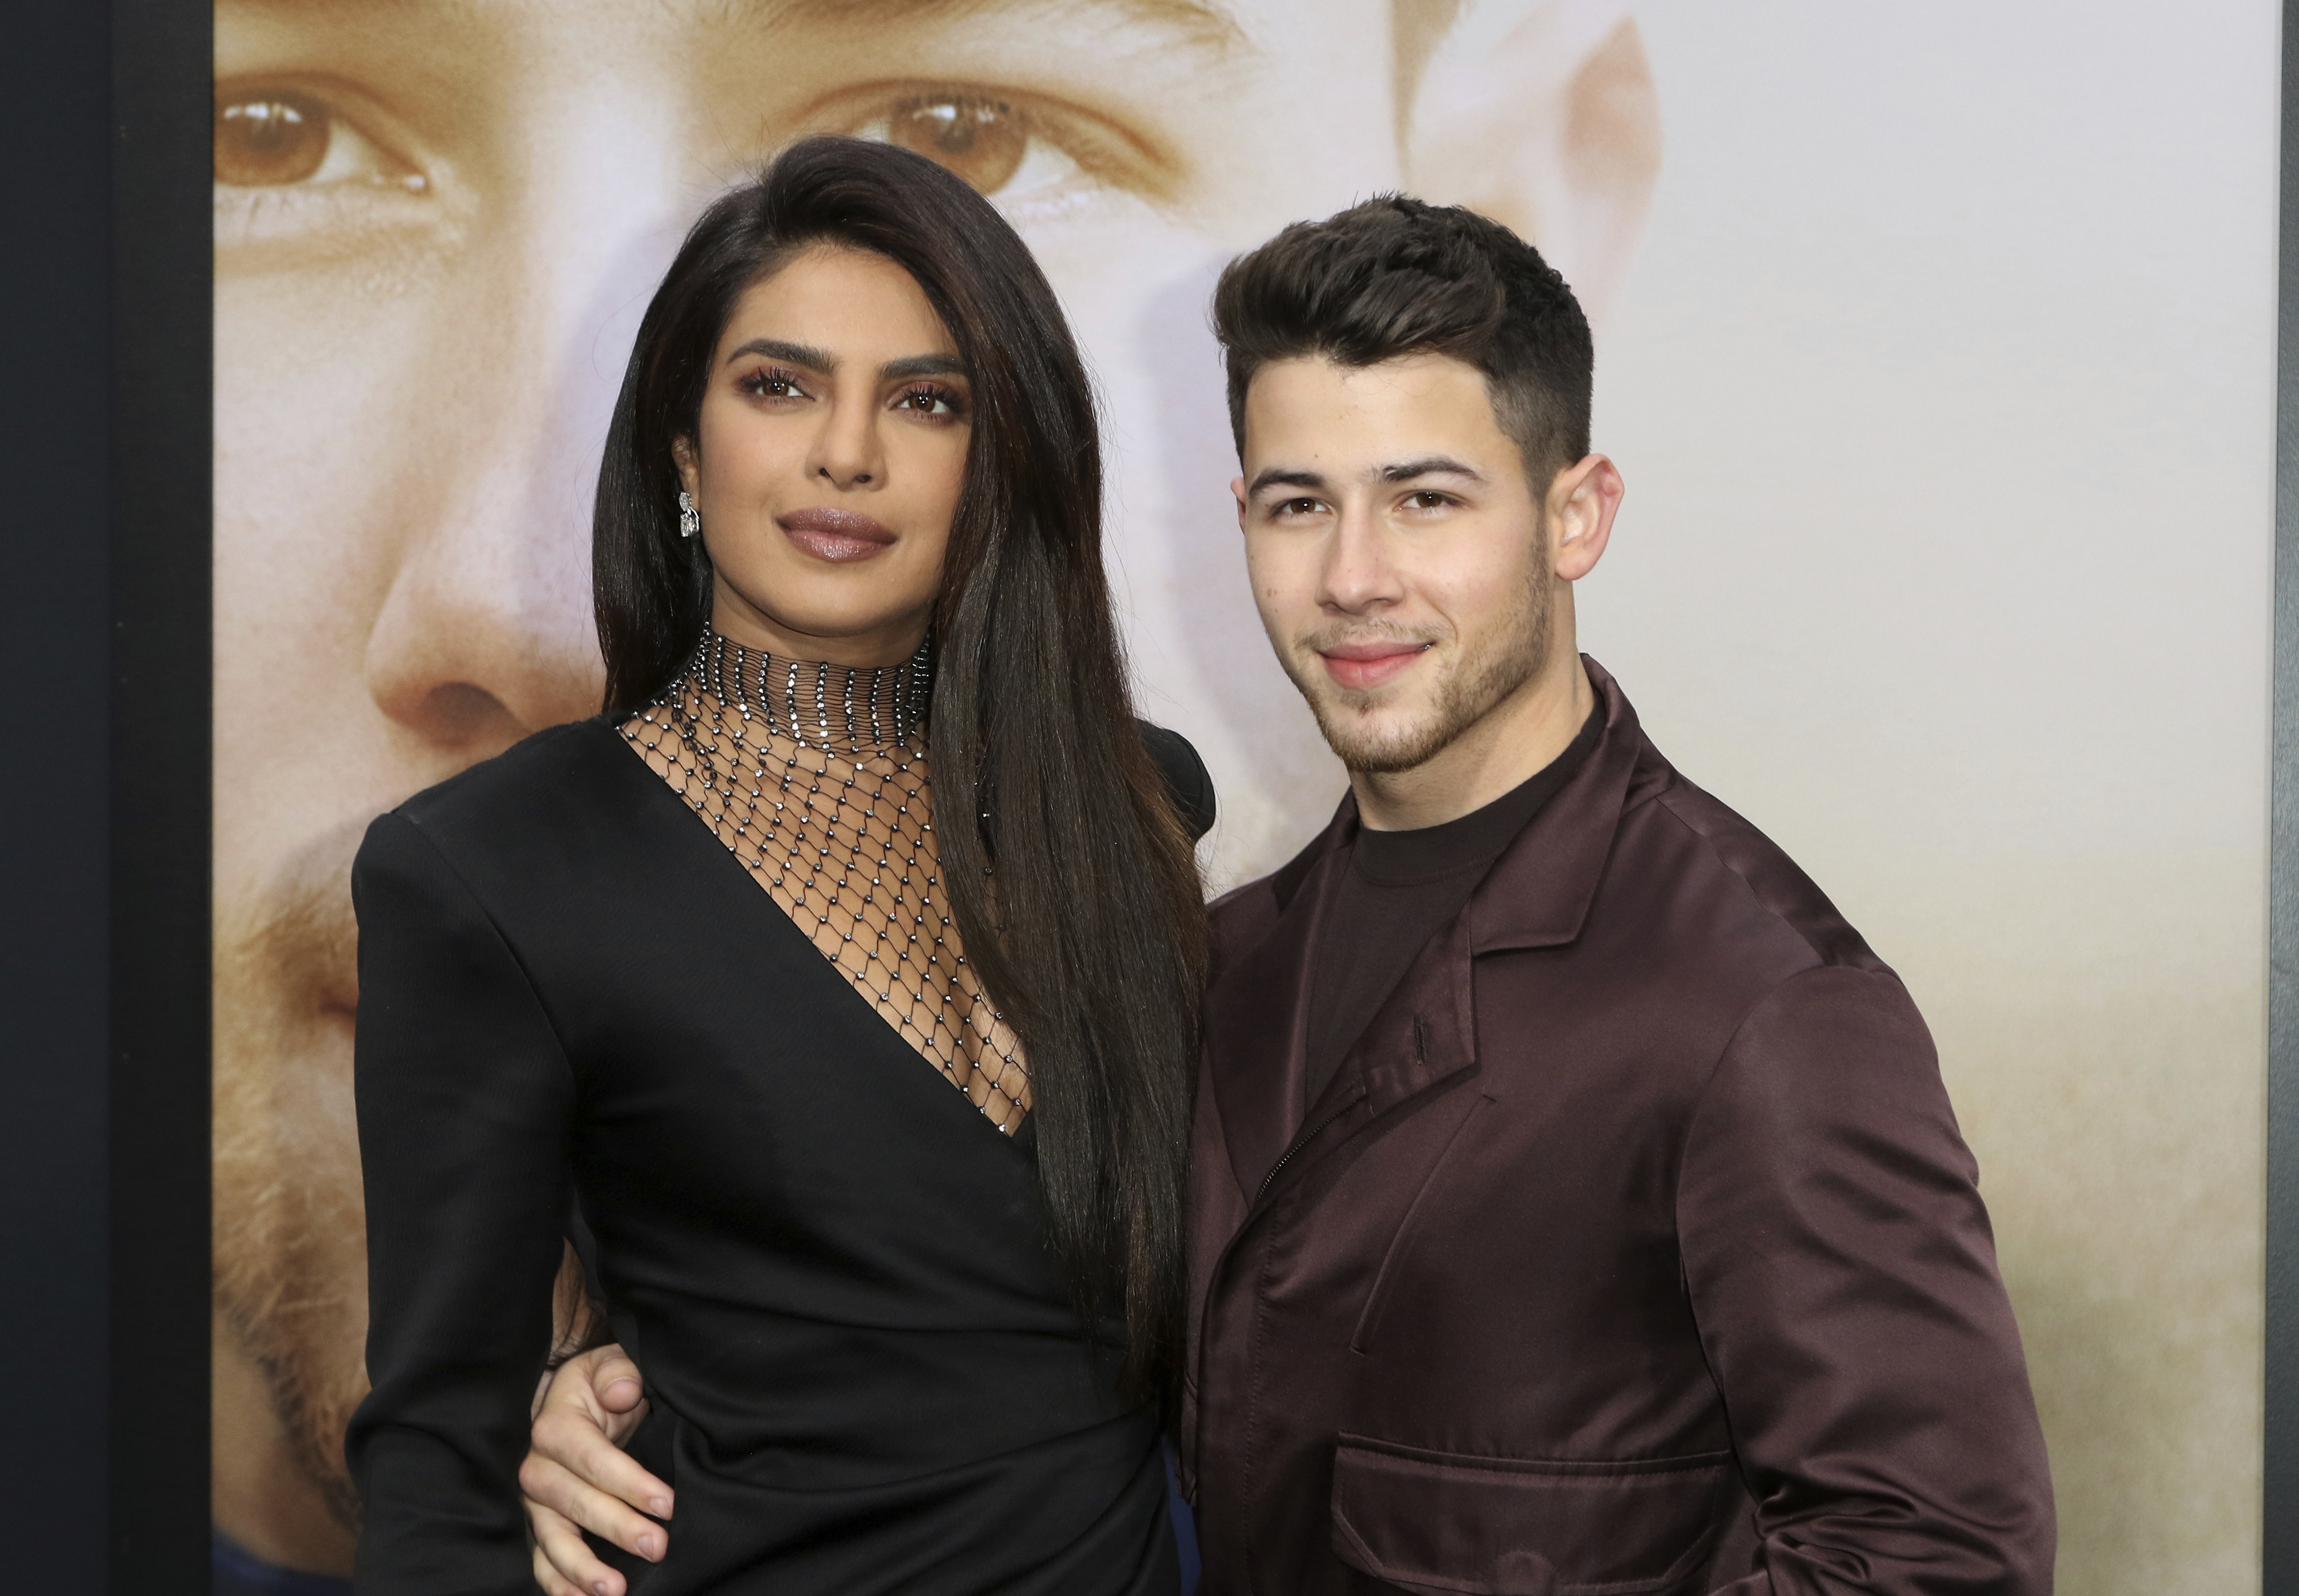 Nick Jonas and Priyanka Chopra introduce their daughter, who has spent more than 100 days in the ICU